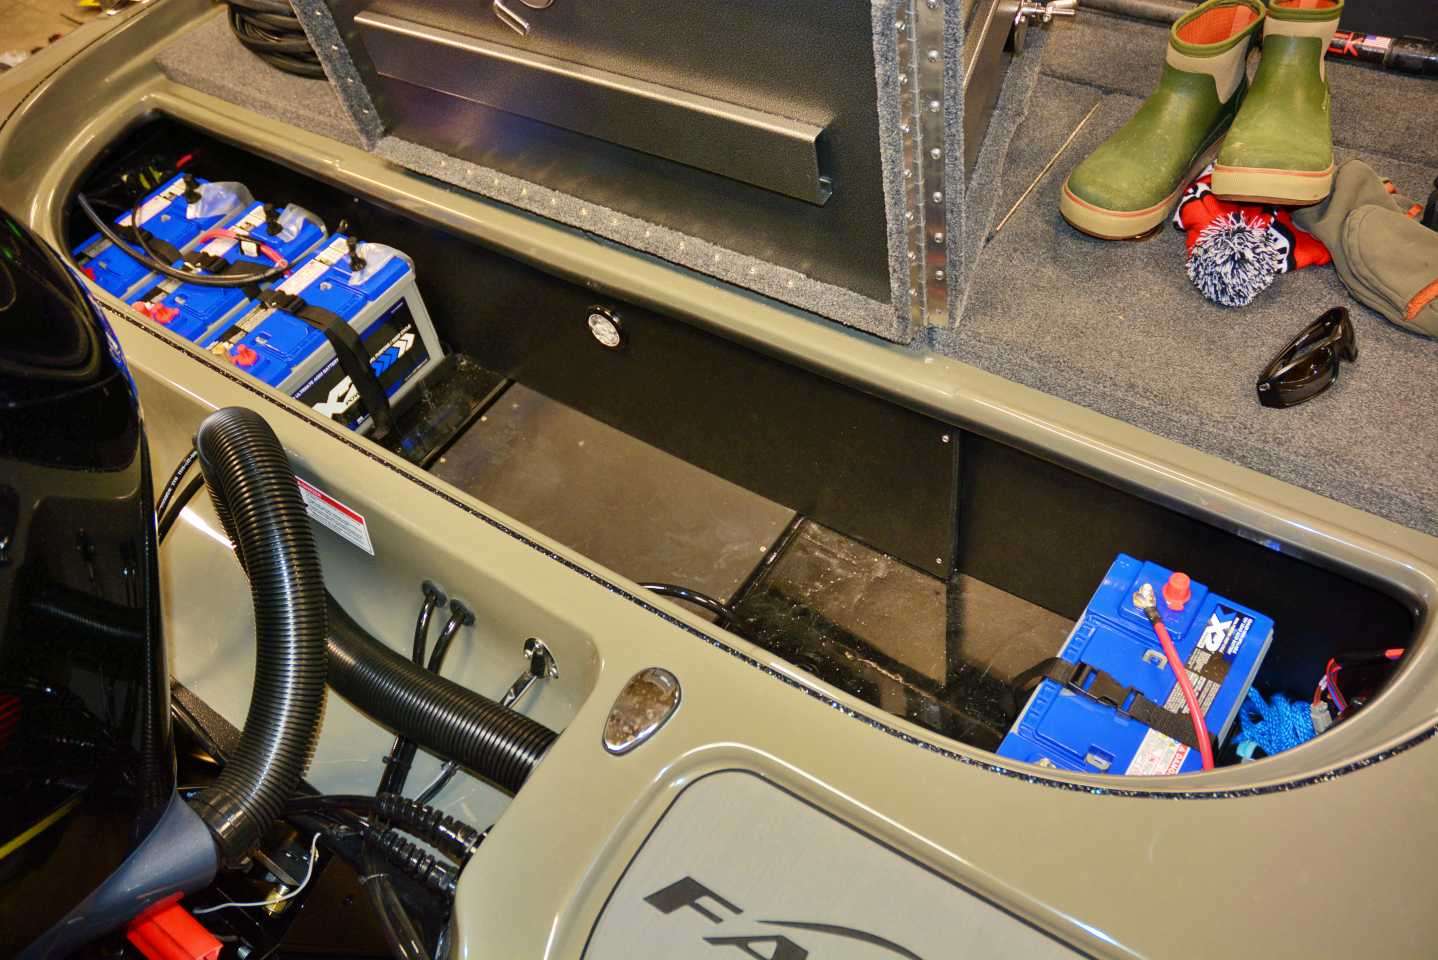 Before Palmer arrived, Jocumsen installed these X2Power Batteries in the spacious compartment.
